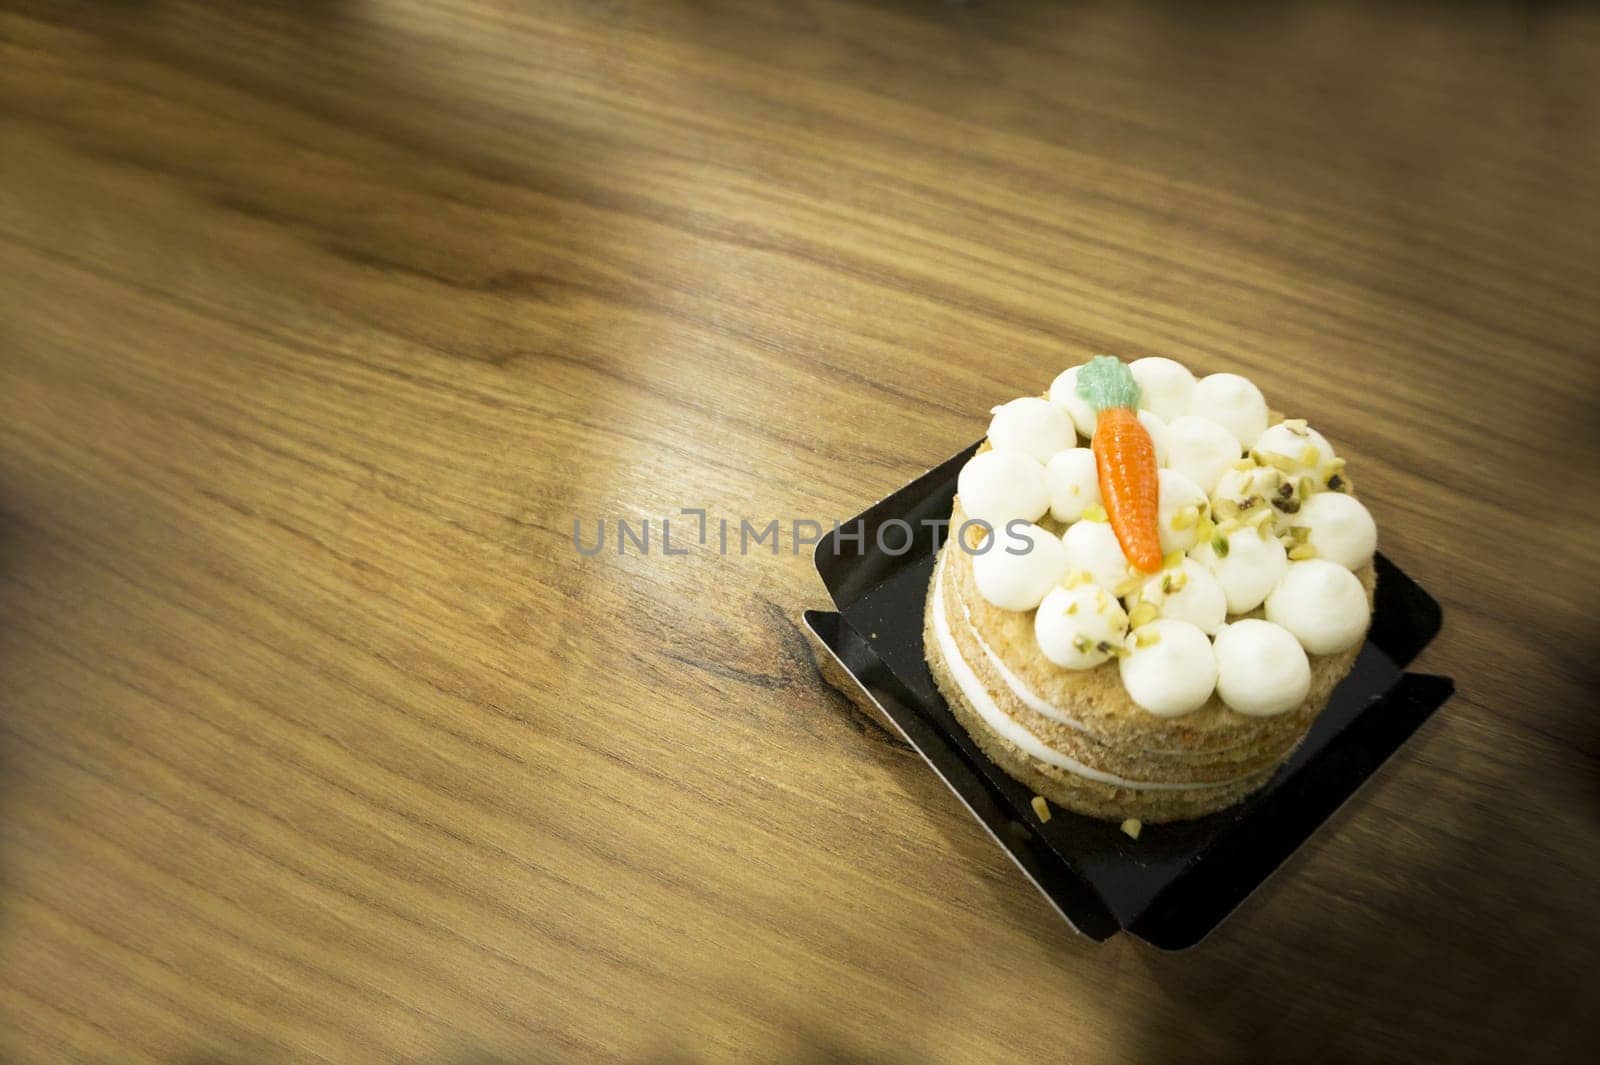 Carrot cake on wooden table. No people